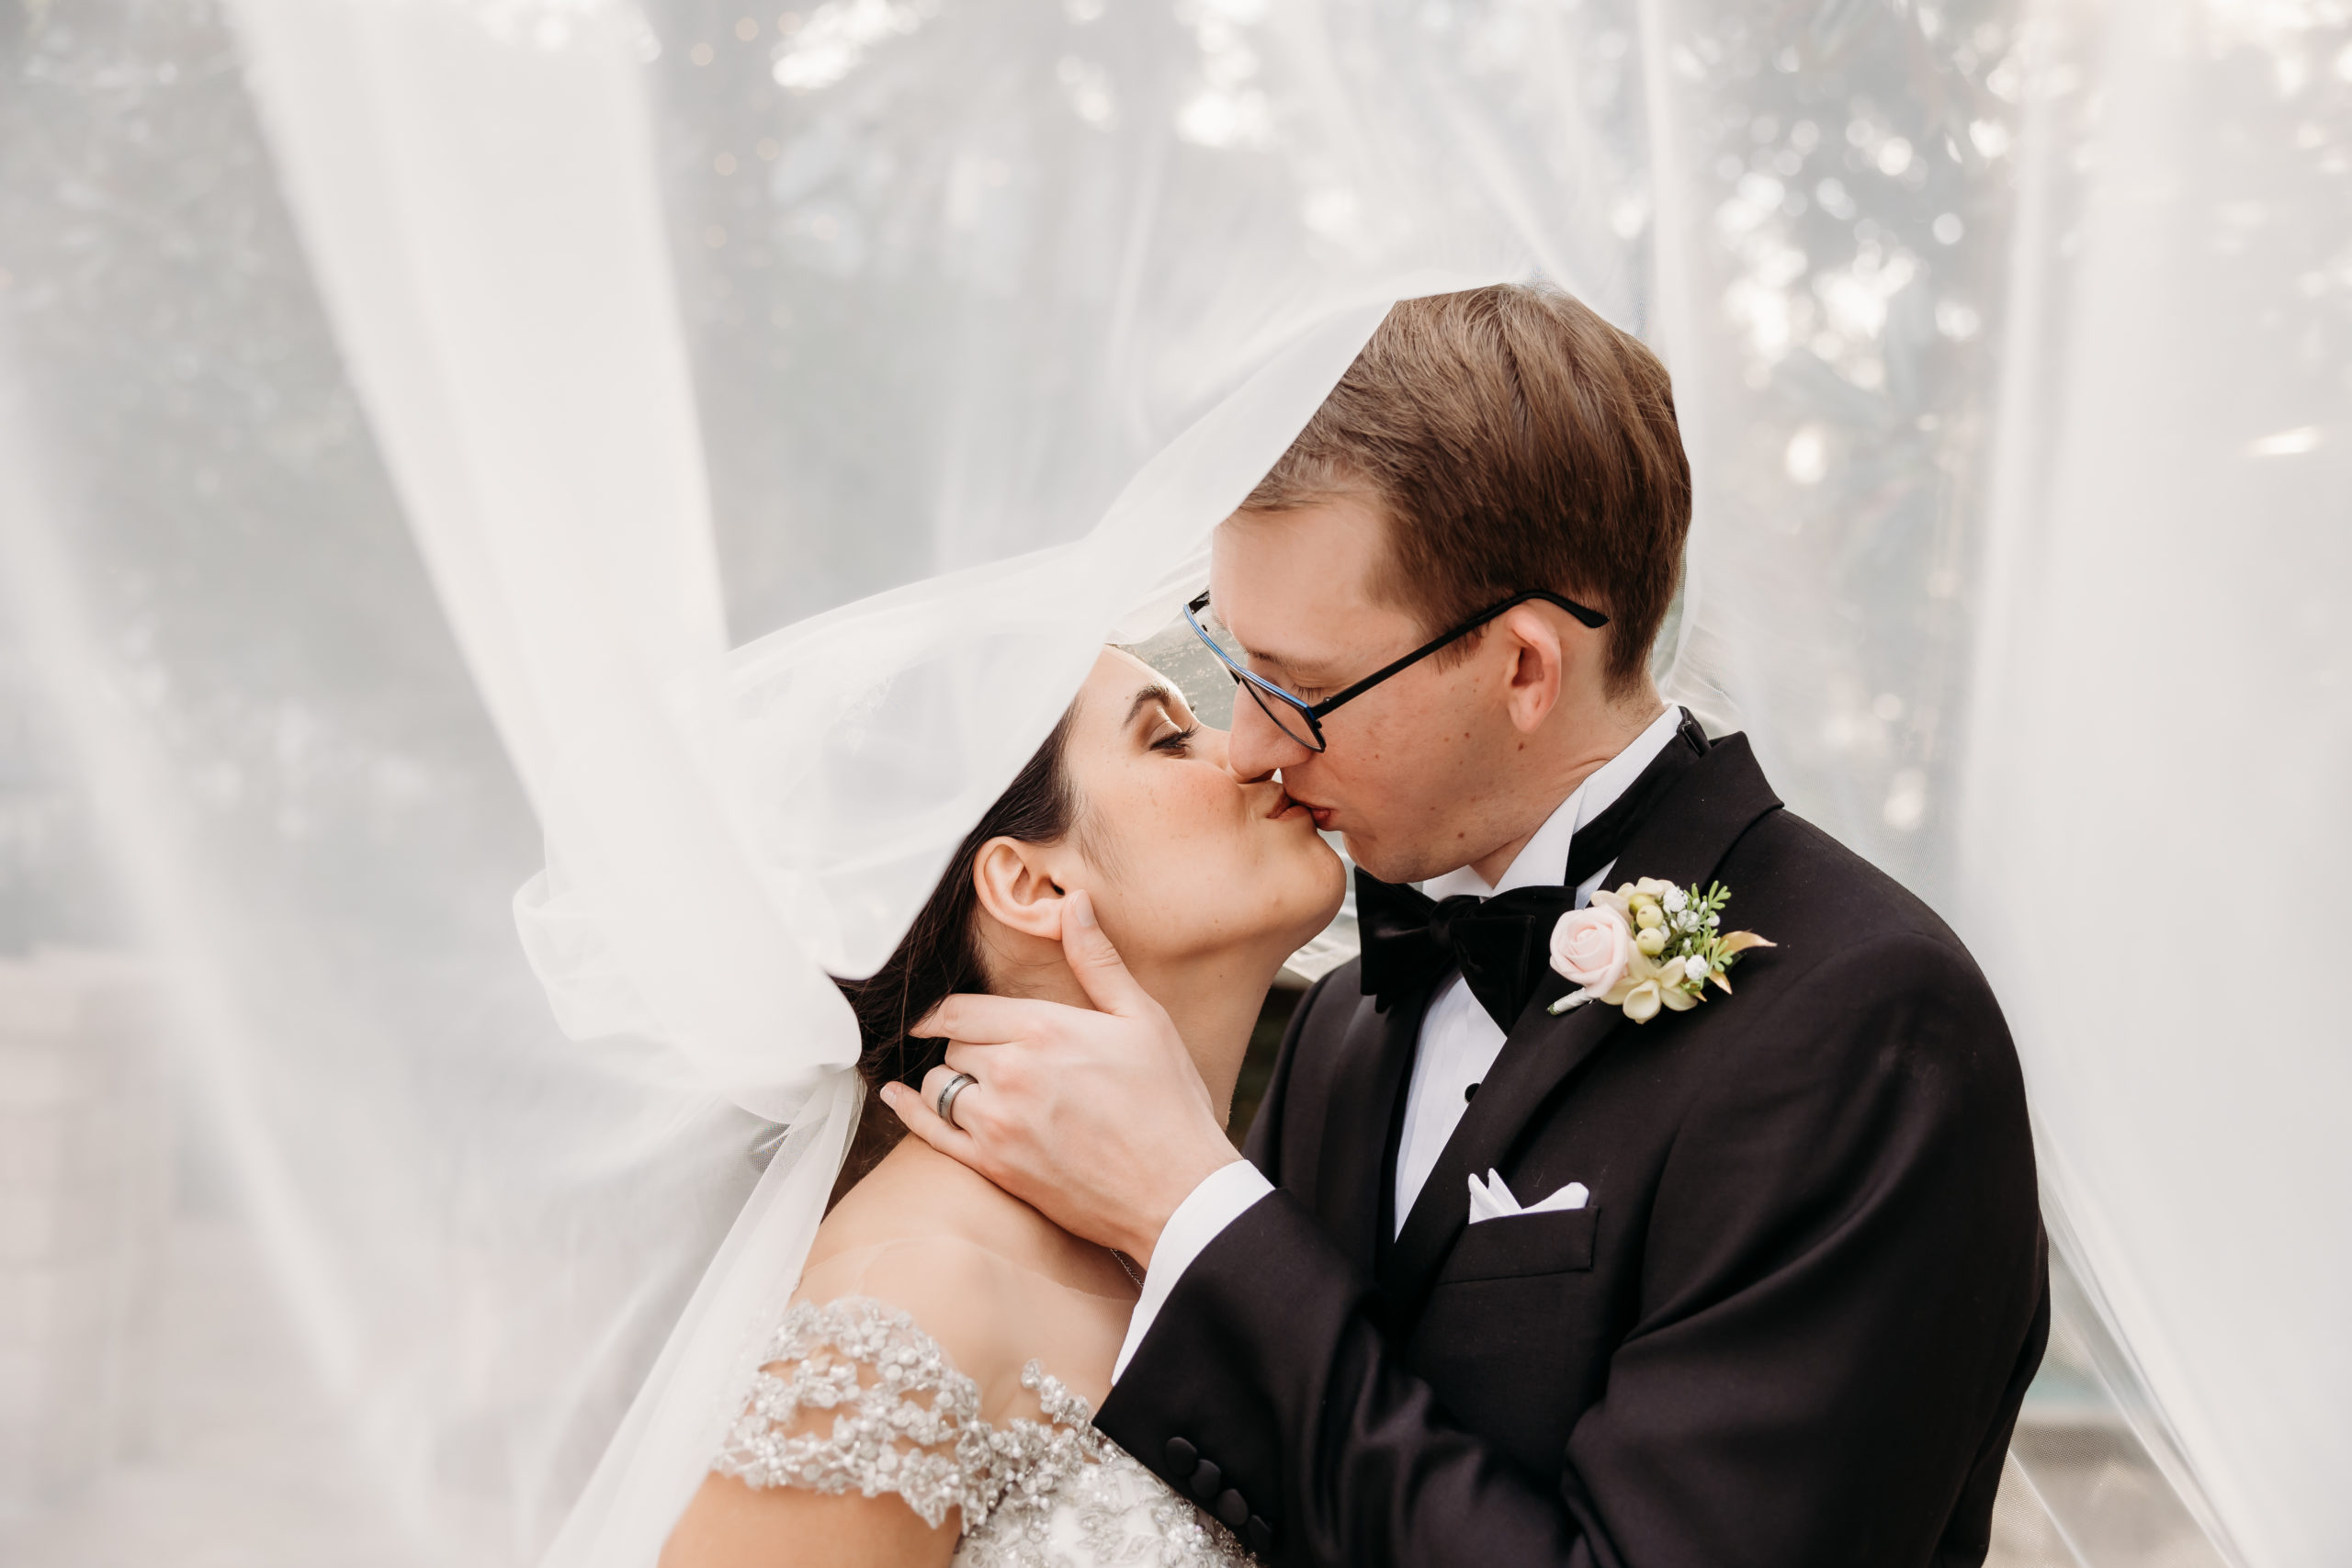 Bride and Groom with floating Veil Wedding Reception Portraits at Dr Phillips House Orlando on Lake Lucerne